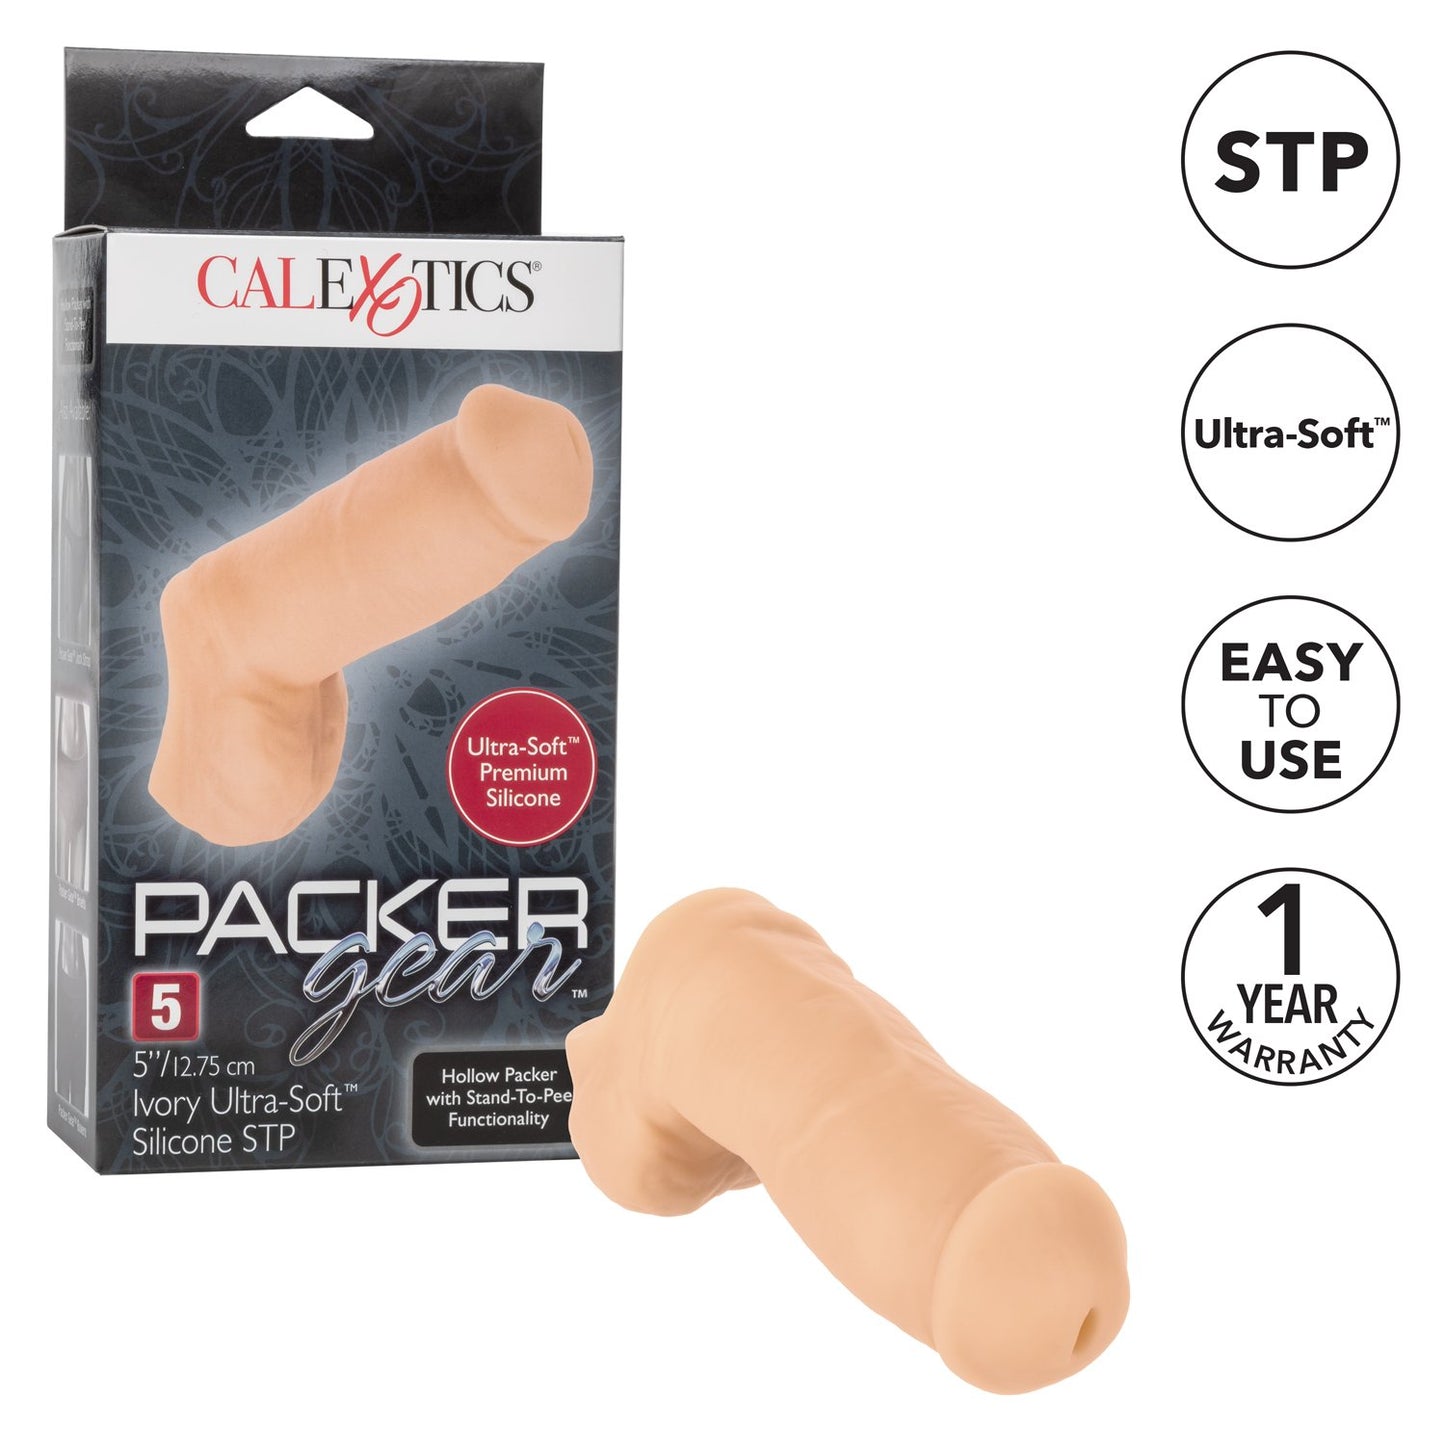 Packer Gear 5”/12.75 cm Ultra-Soft Silicone STP